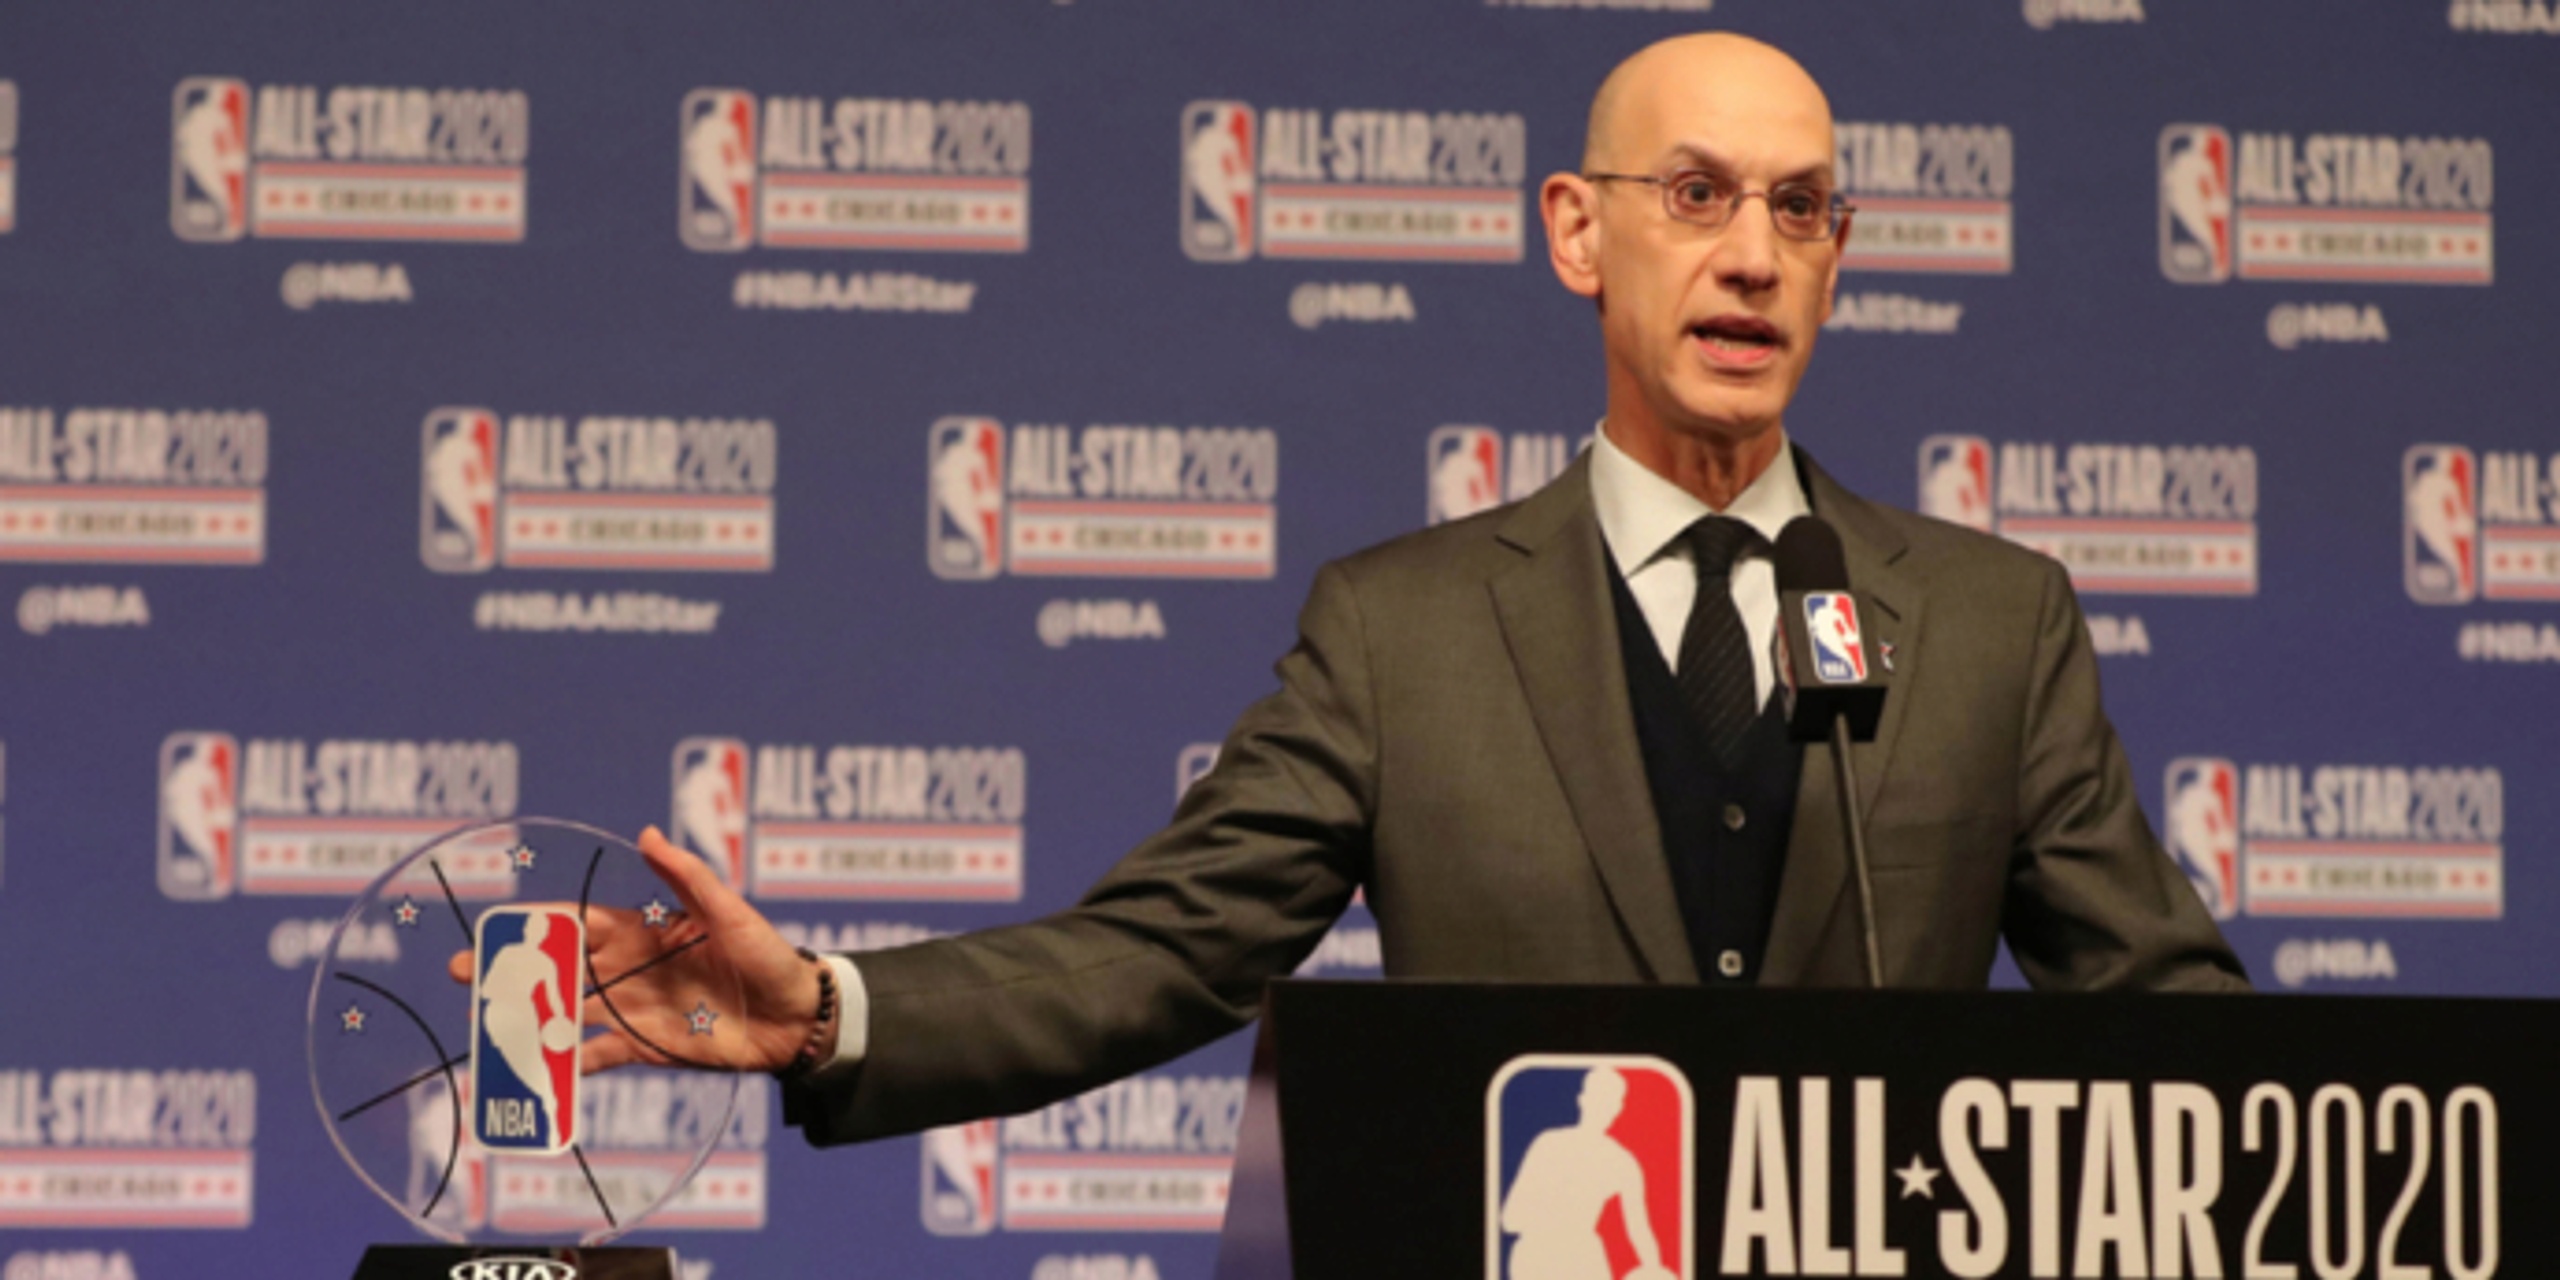 NBA likely to release schedule in halves